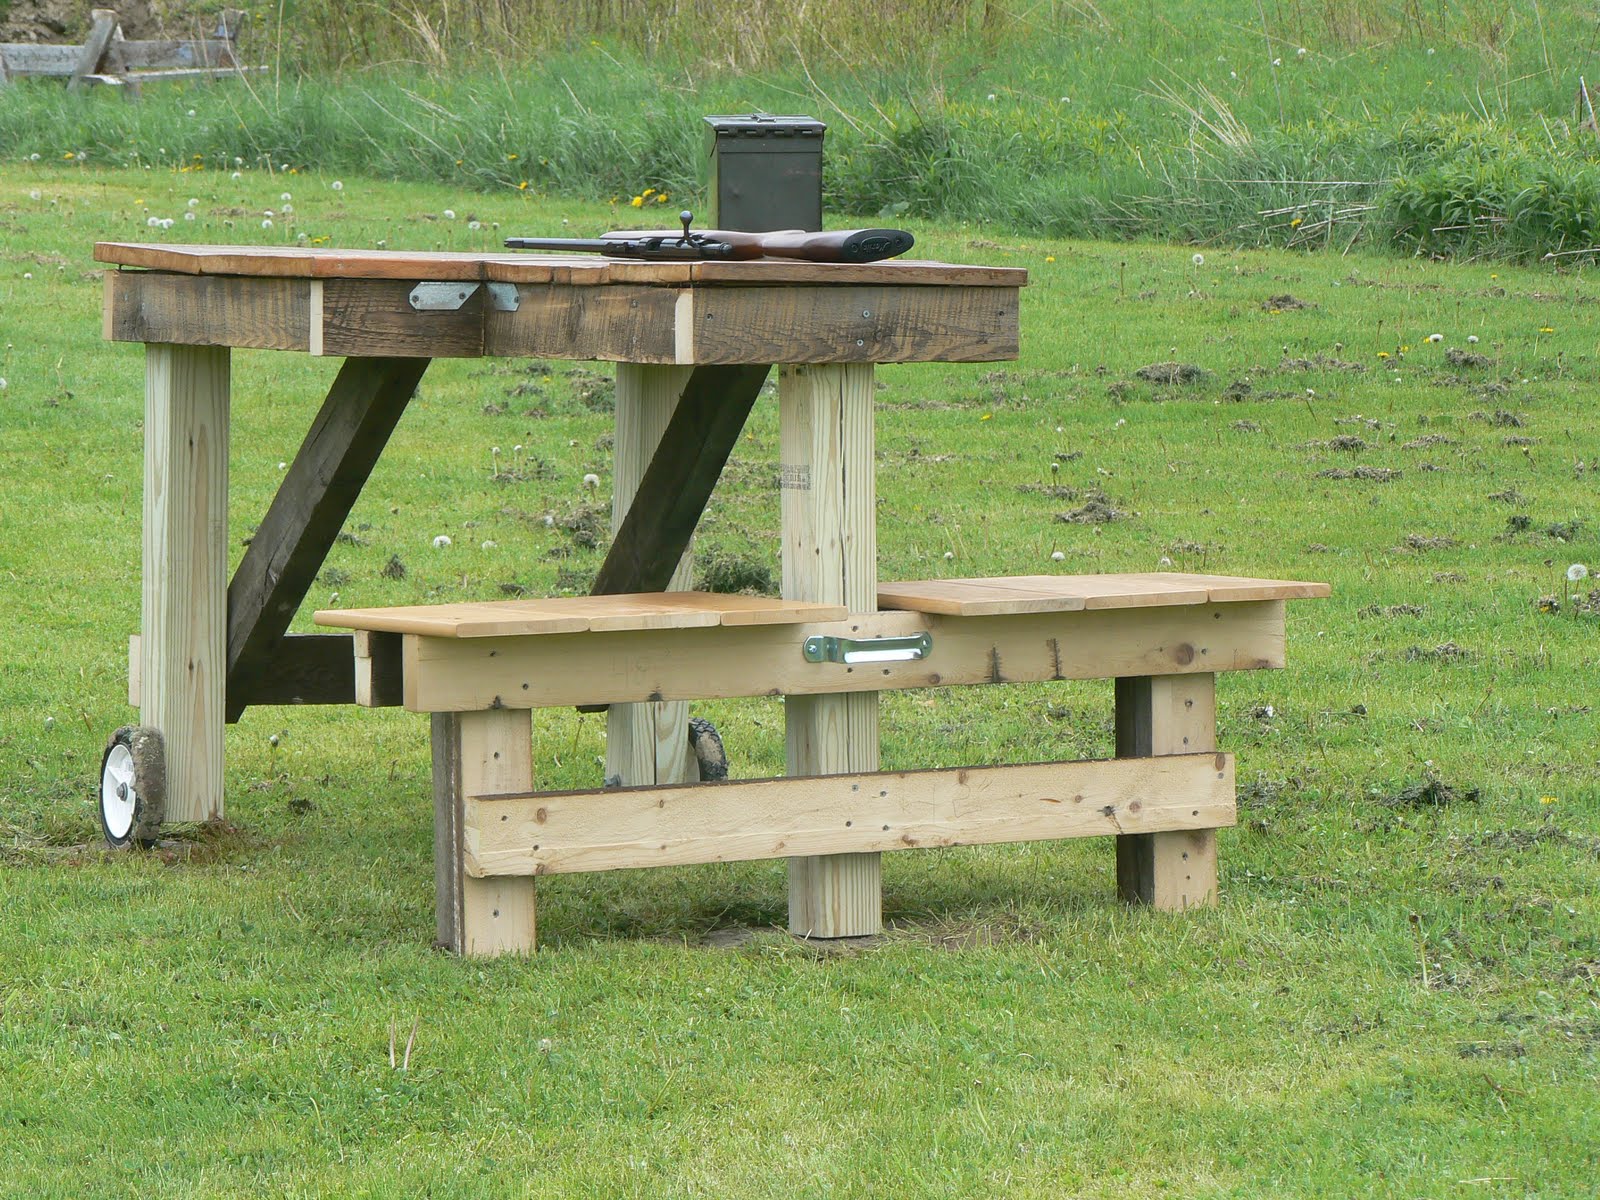 Tbib Ideas: Where to get Woodworking plans shooting bench